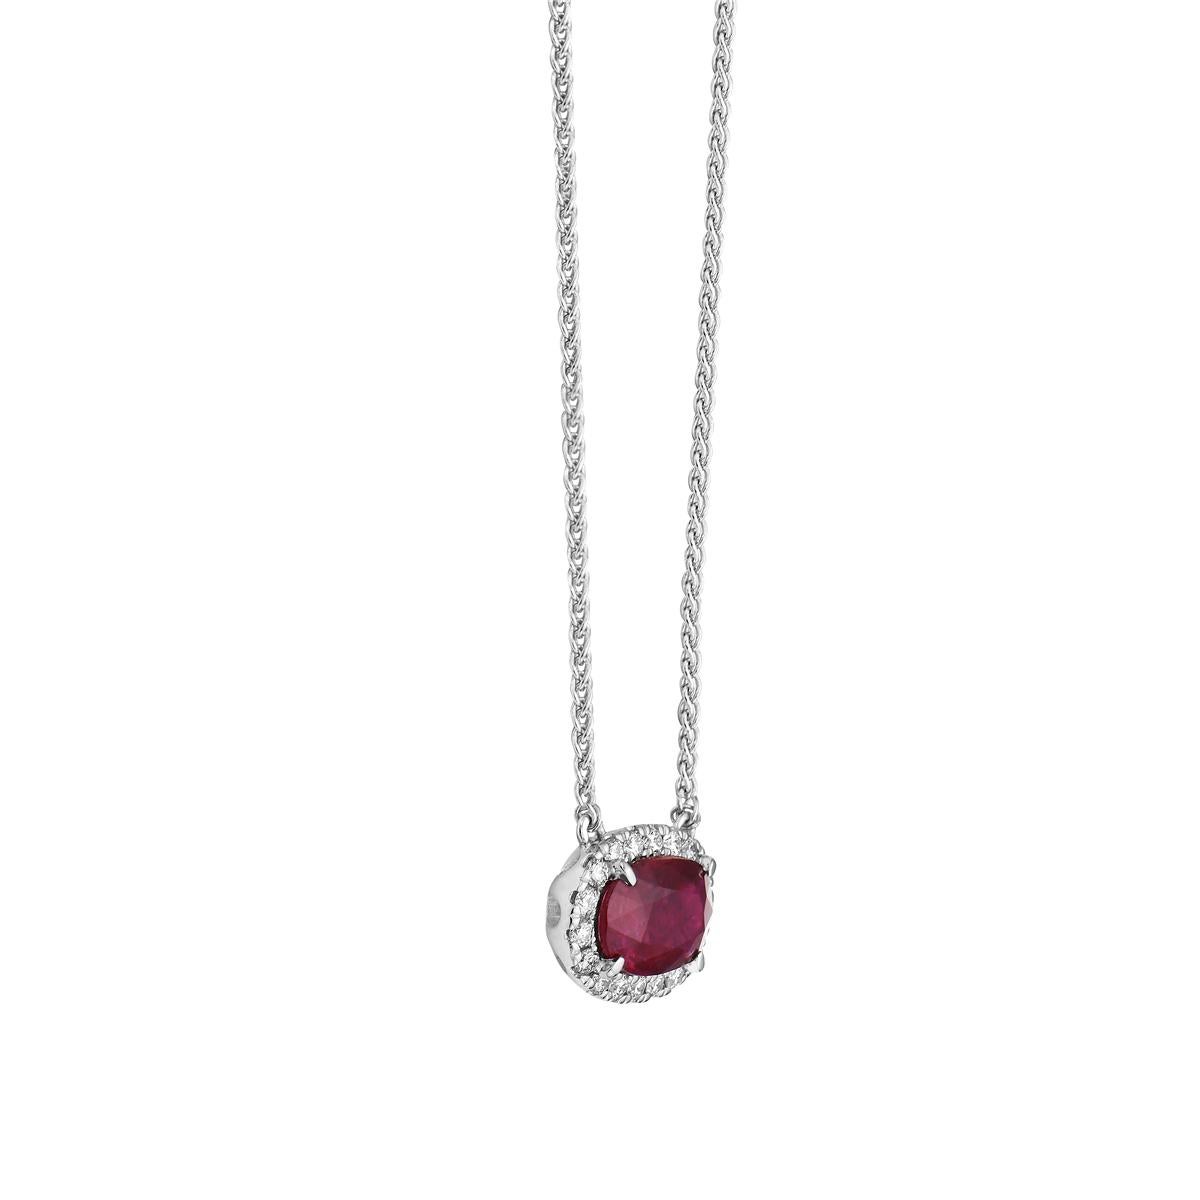 With this exquisite oval-shaped ruby and diamond necklace, style and glamour are in the spotlight. This 18-karat ruby and diamond necklace is made from 1.1 grams of gold. This necklace is adorned with VS2, G color diamonds, made out of 18 round